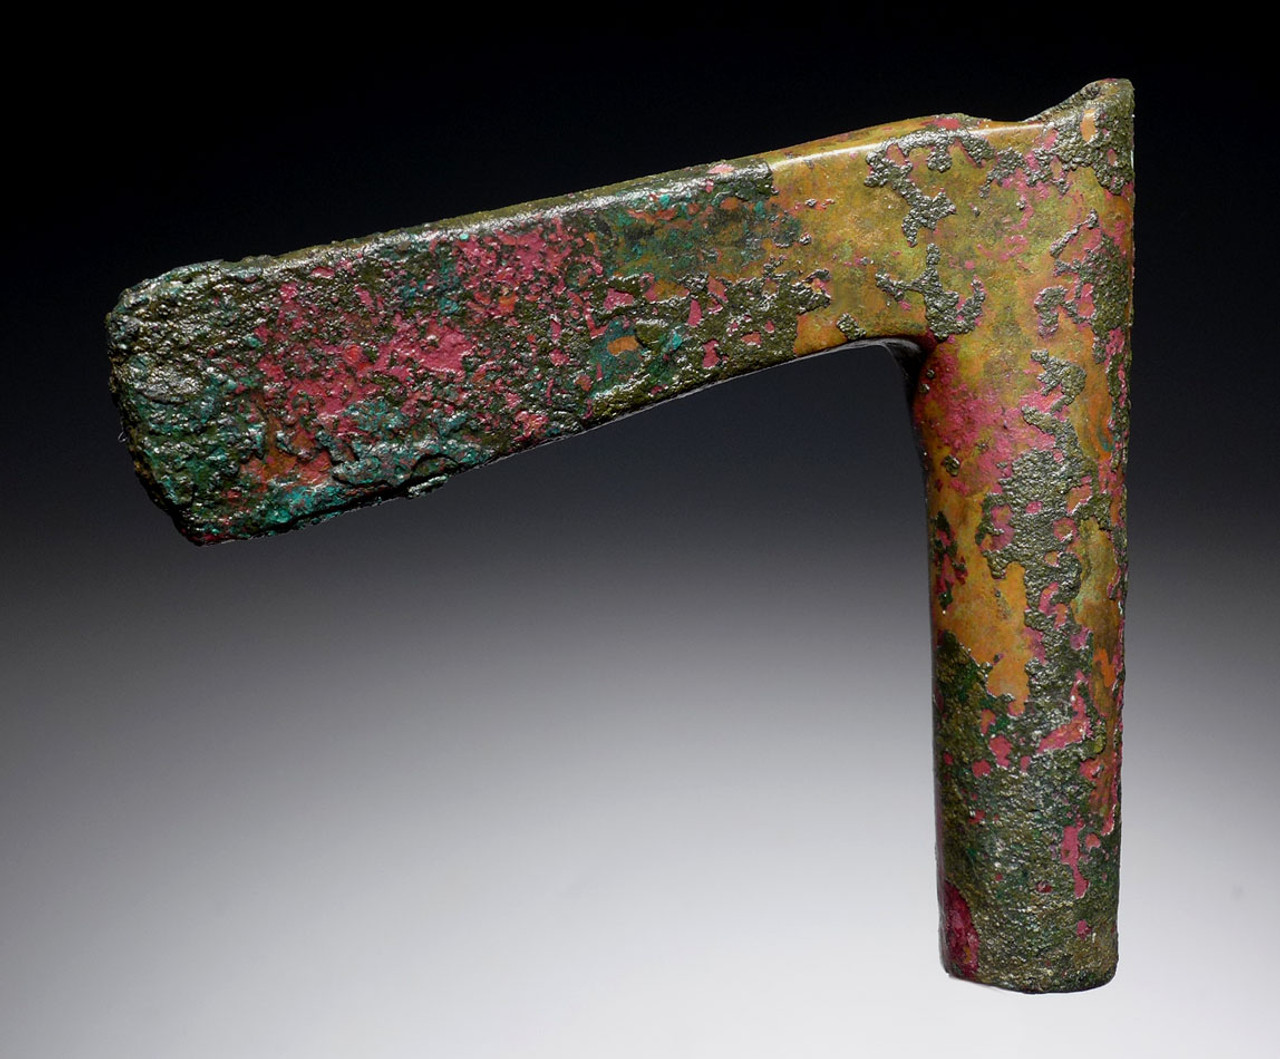 COLORFUL ARMOR-PIERCING LURISTAN BRONZE AXE FROM THE ANCIENT NEAR EAST  *LUR147